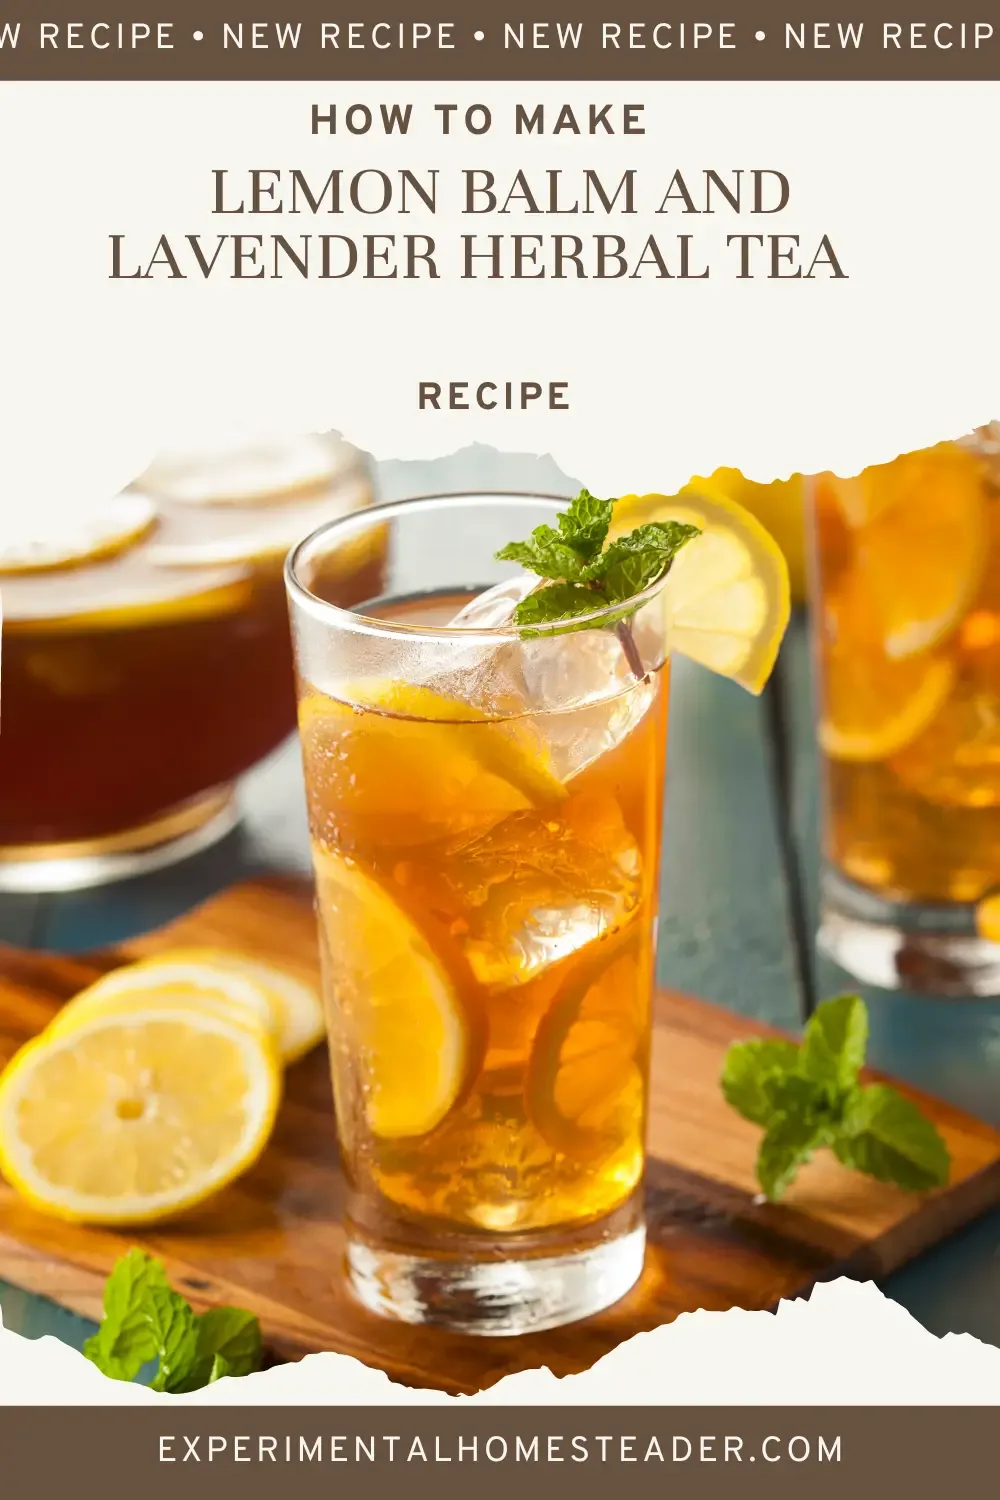 Ice tea in a pitcher and in a glass with ice, lemon slices and lemon balm.